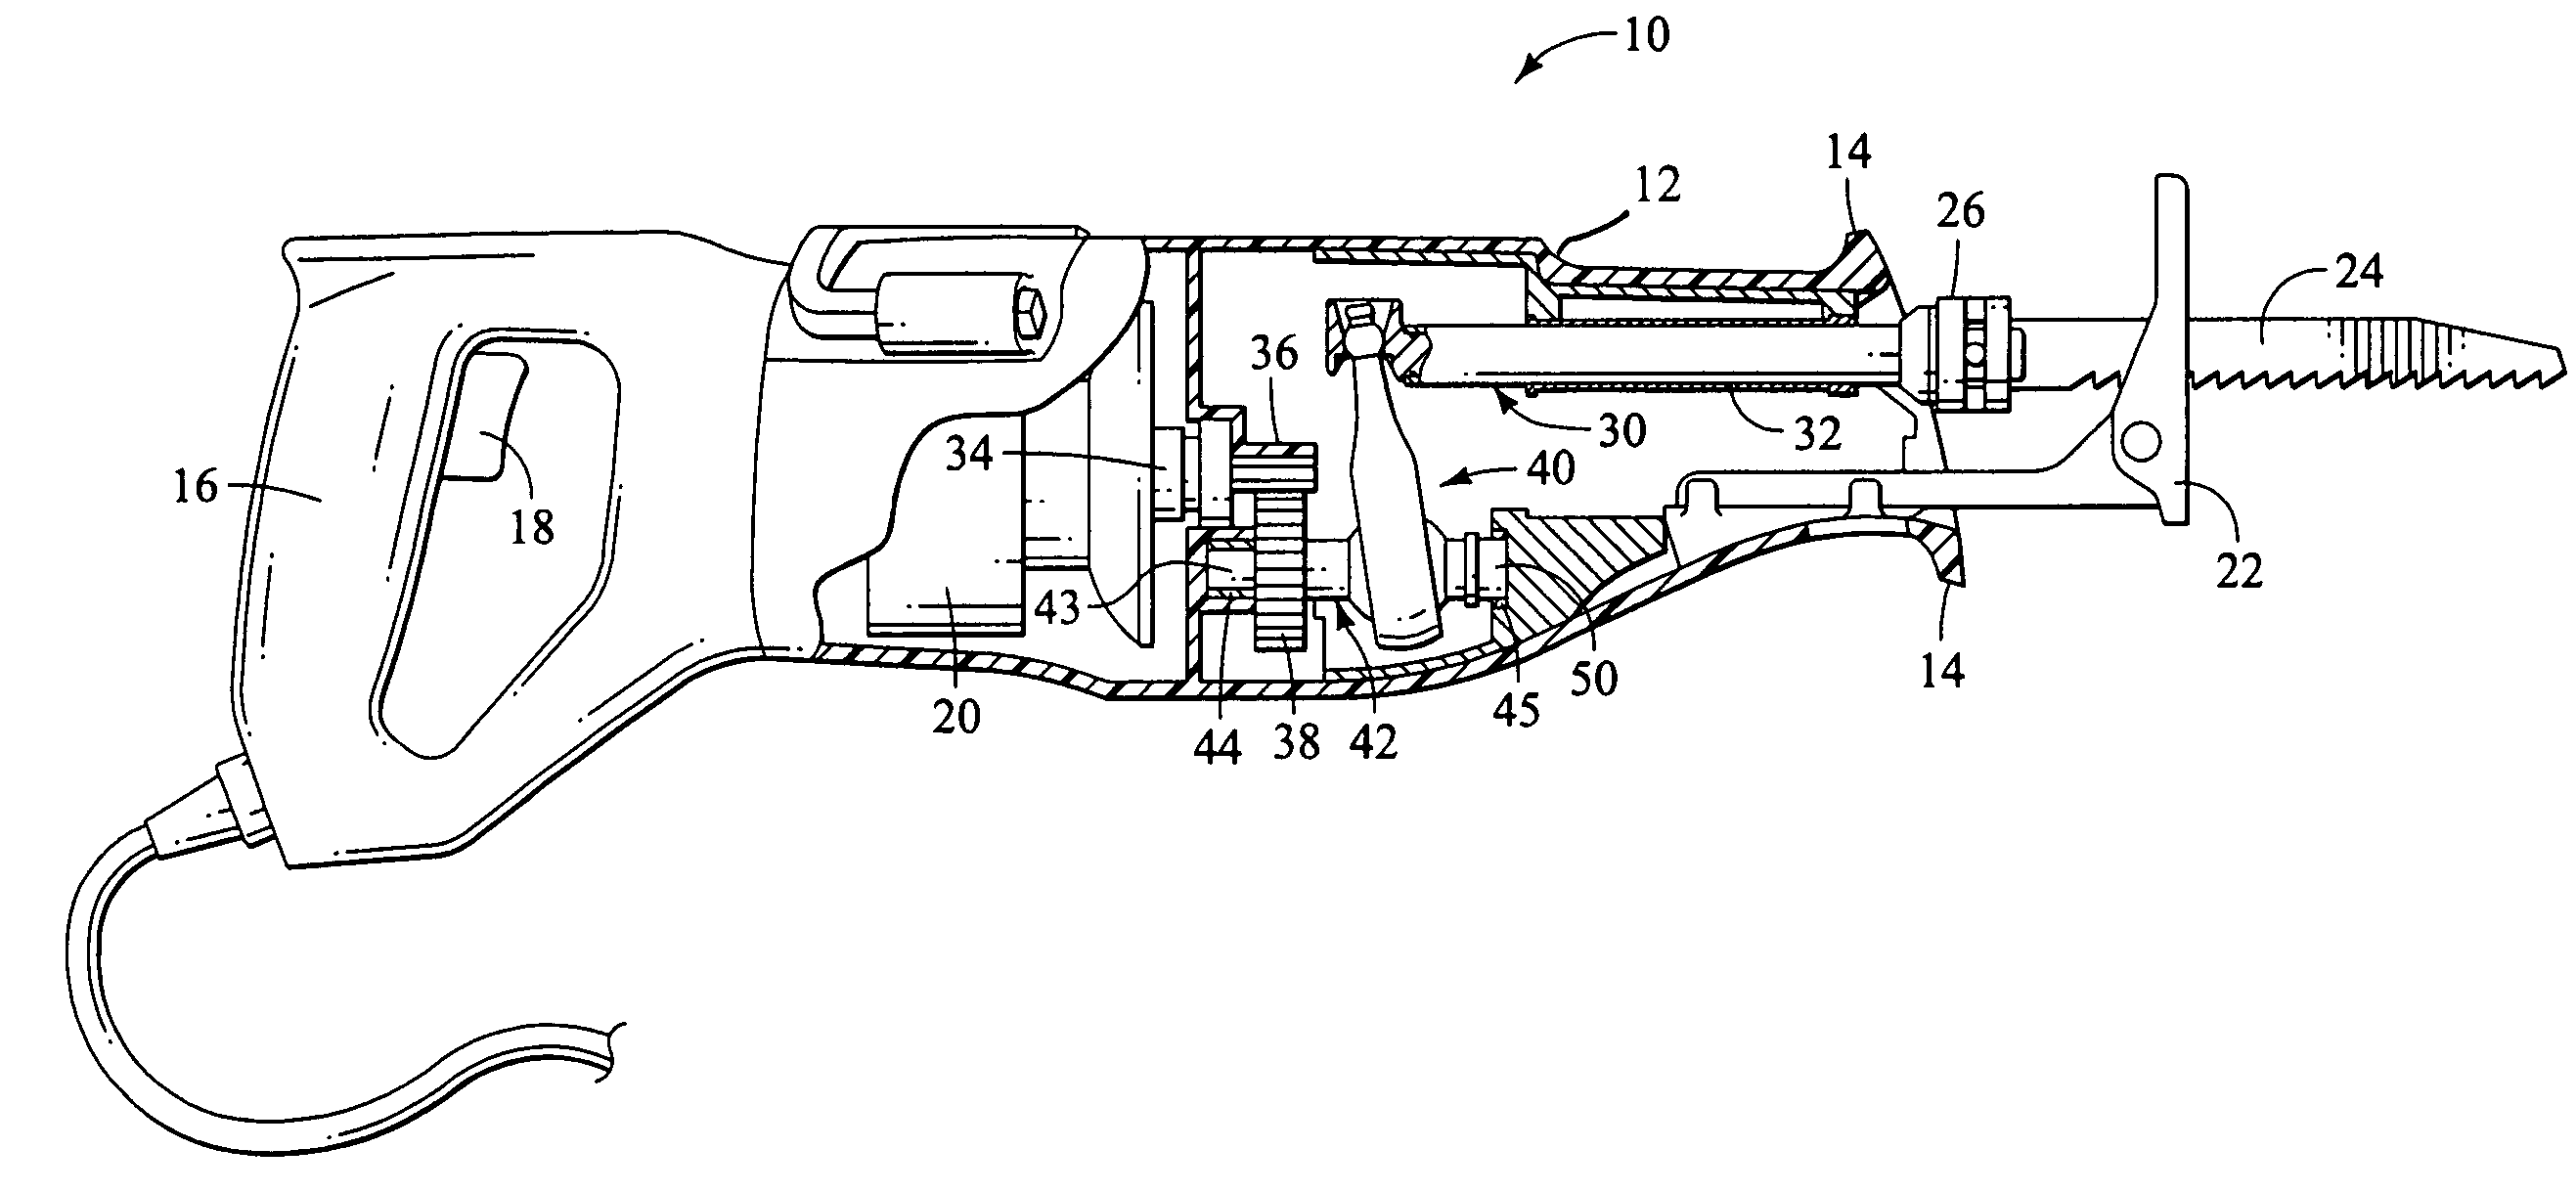 Anti-rotation drive mechanism for a reciprocating saw